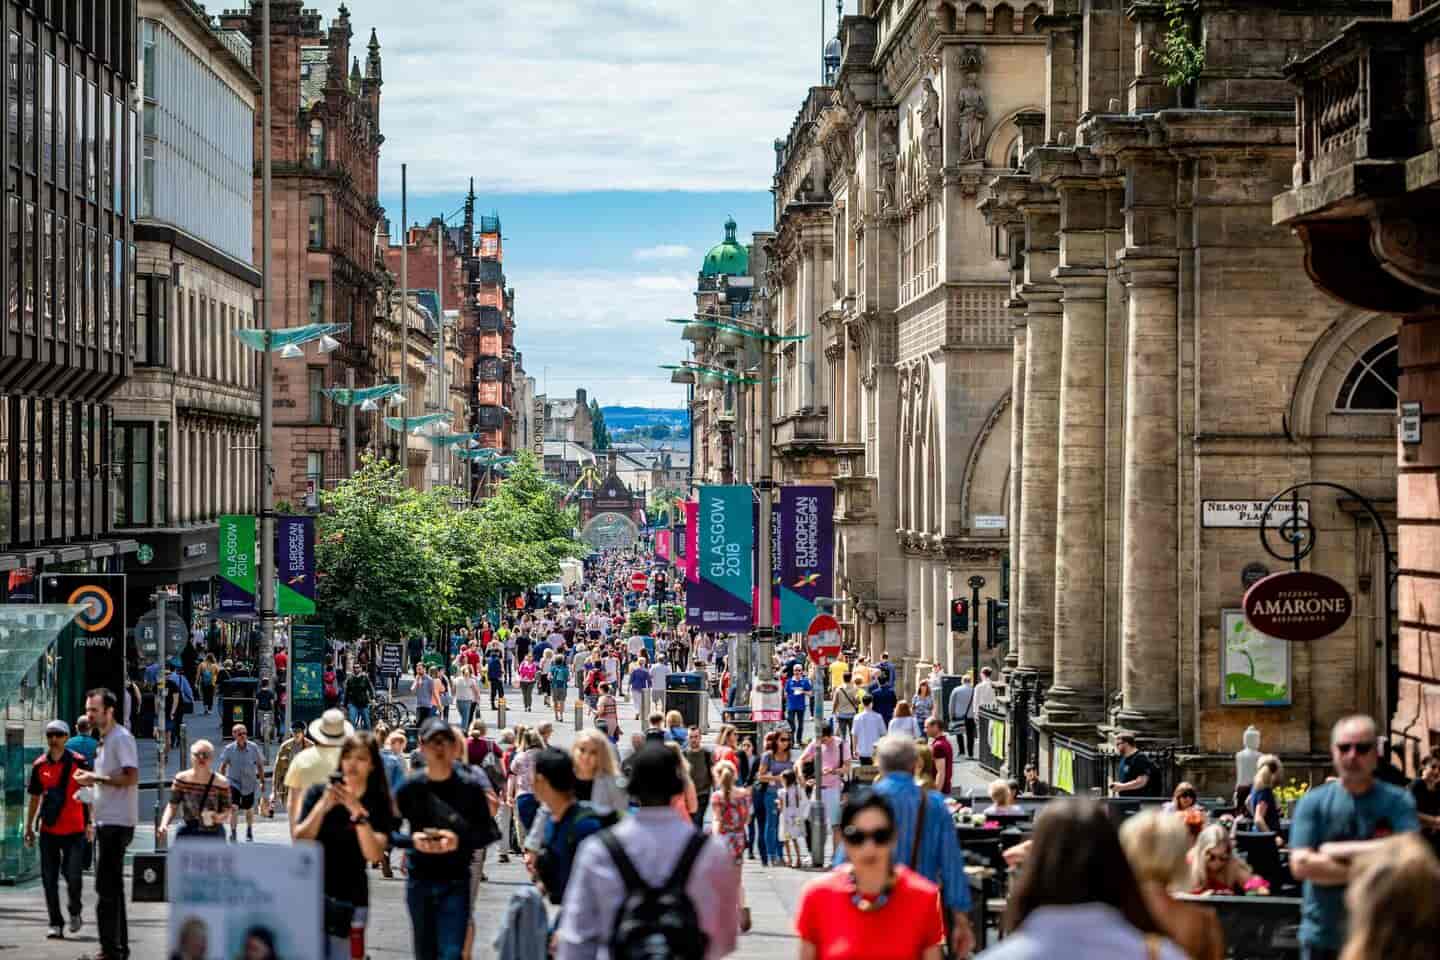 Student Accommodation in Glasgow - A busy Buchanan Street on the corner of Nelson Mandela Place